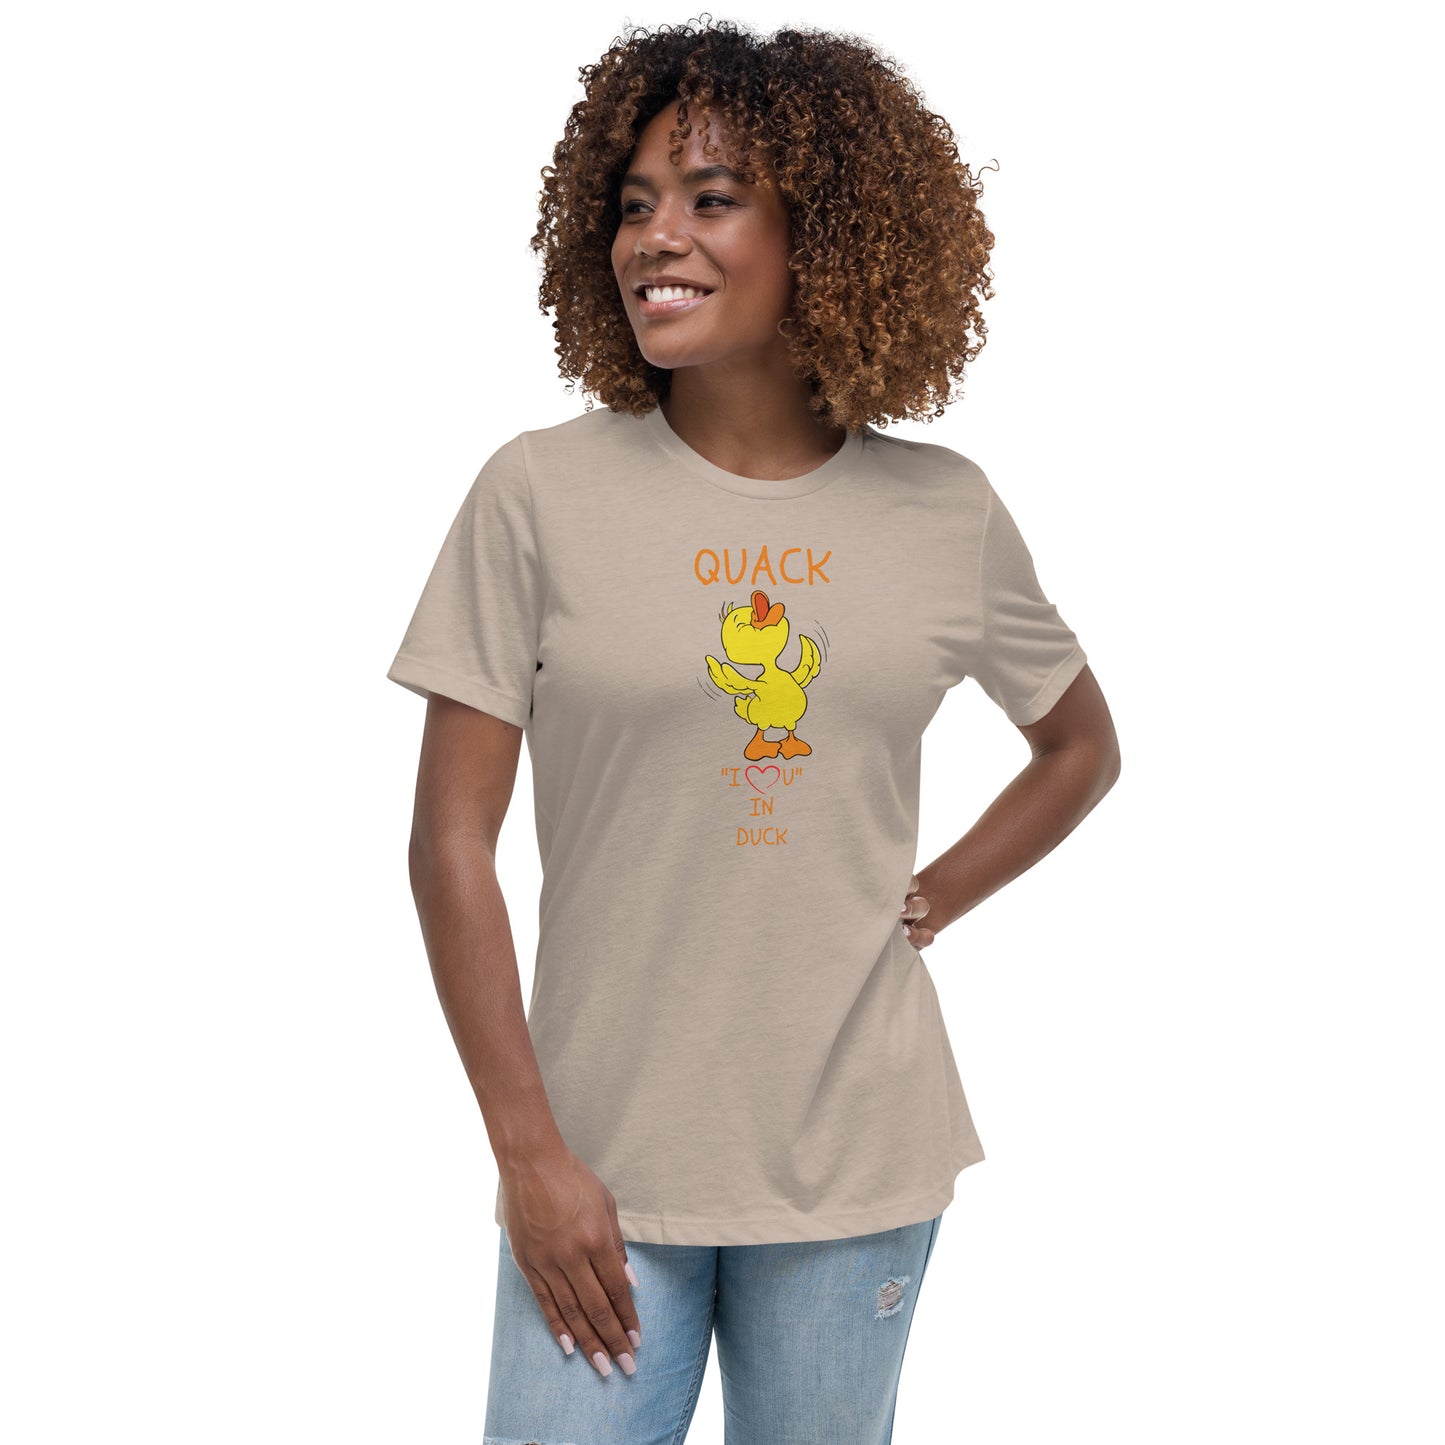 QUACK "I LOVE YOU" IN DUCK Women's Relaxed T-Shirt